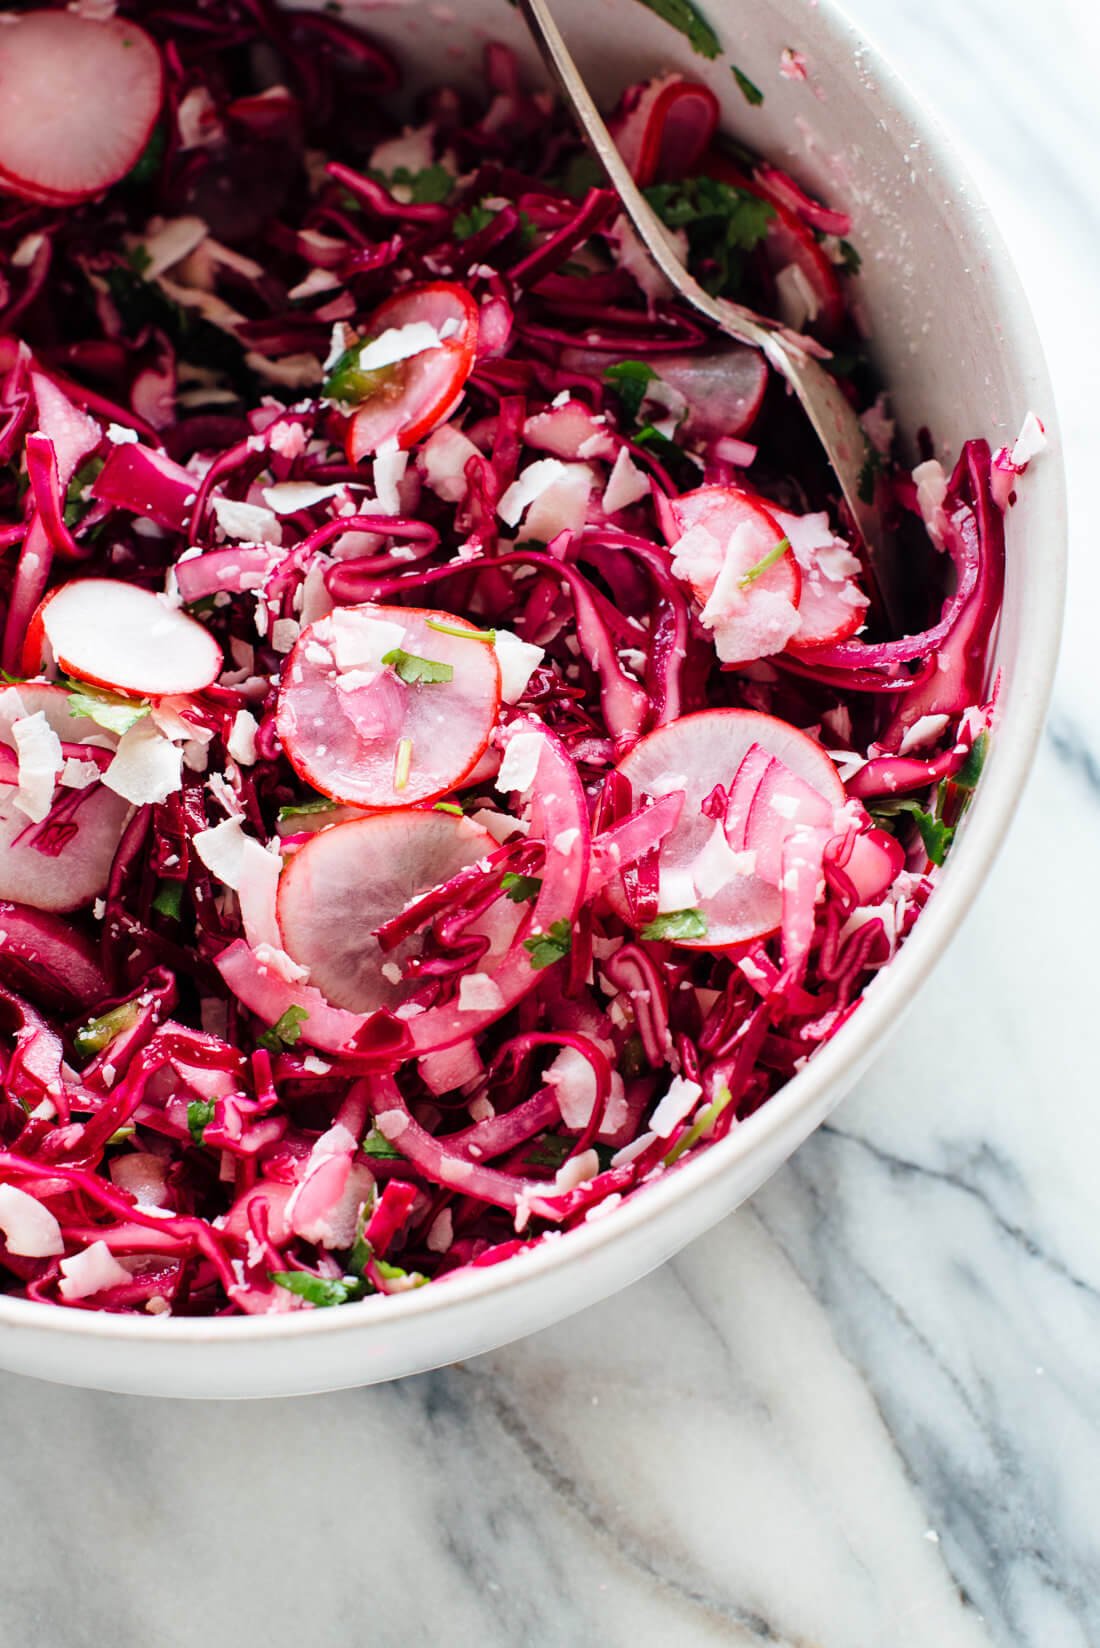 This hot pink slaw is totally irresistible, thanks to—surprise—coconut! If you like coconut, you're going to love this nutrient-dense slaw/side salad. cookieandkate.com